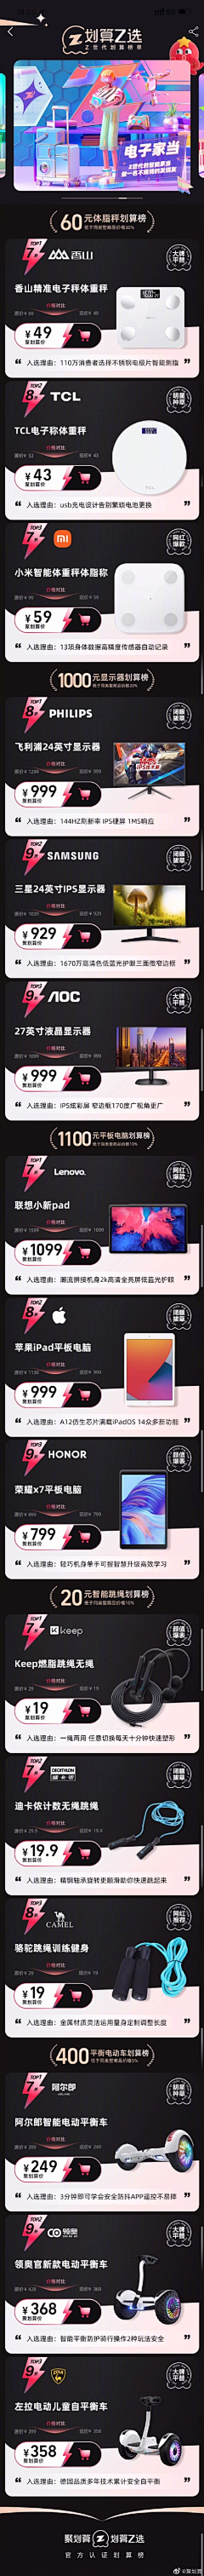 PureAsEver采集到运营 IP角色